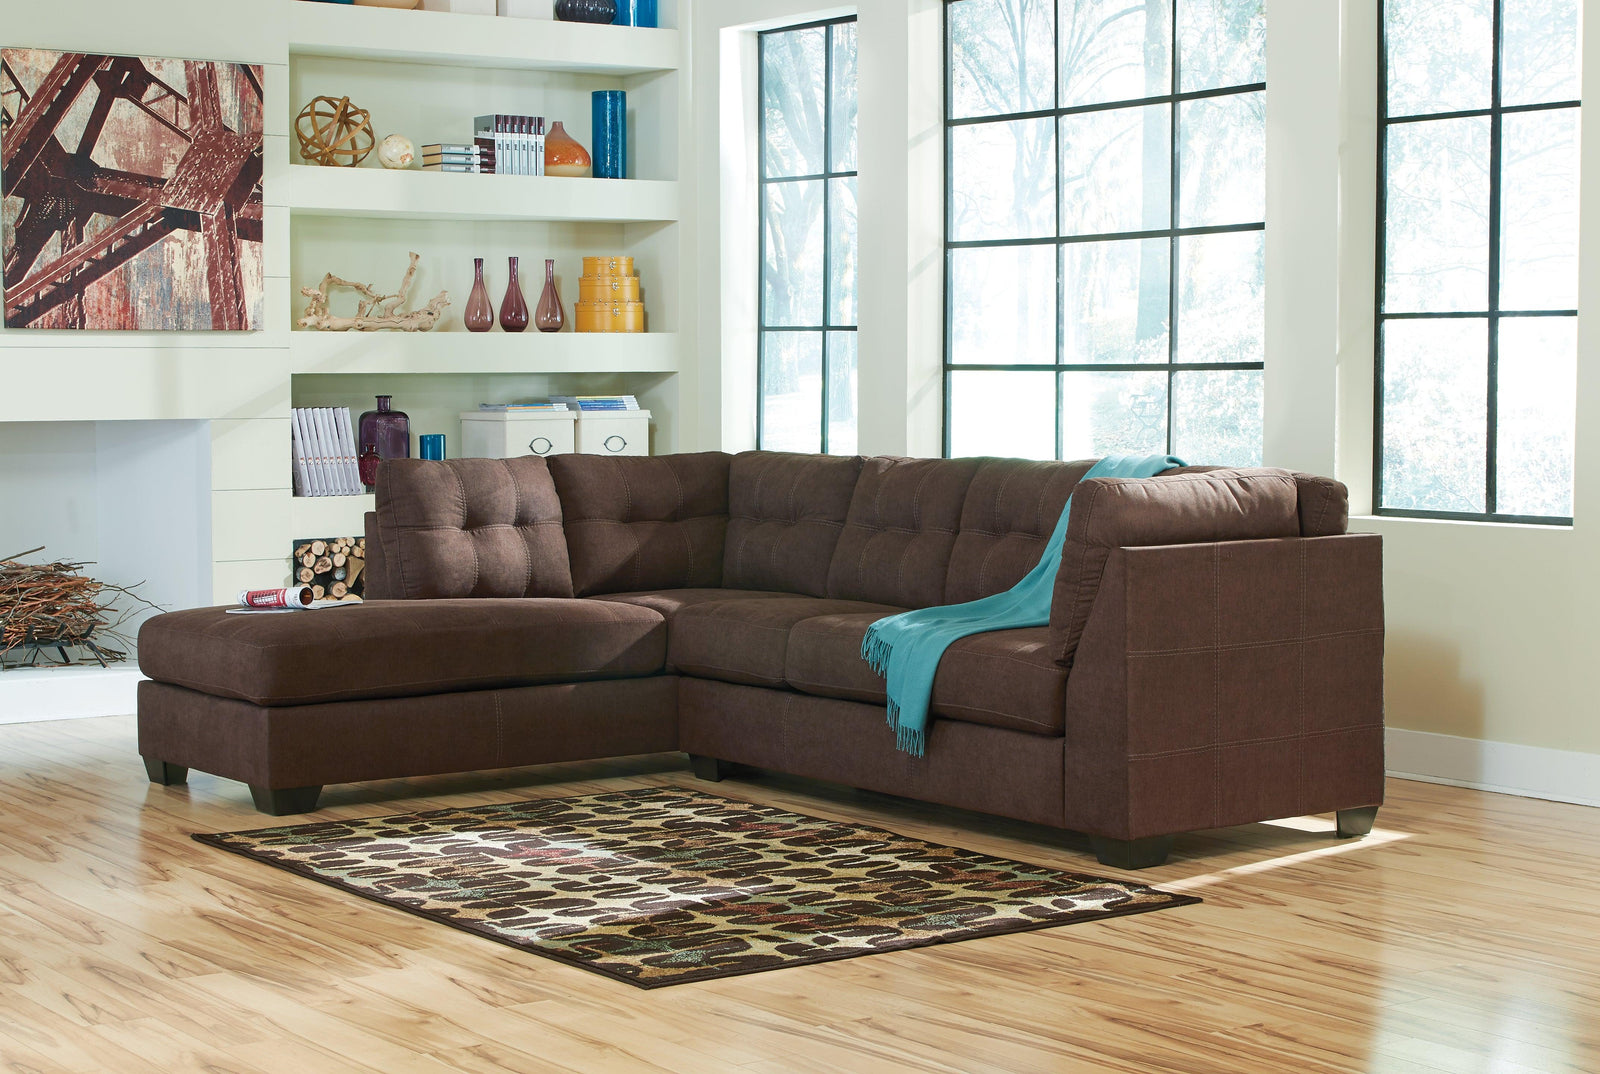 Maier Walnut 2-Piece Sectional With Chaise